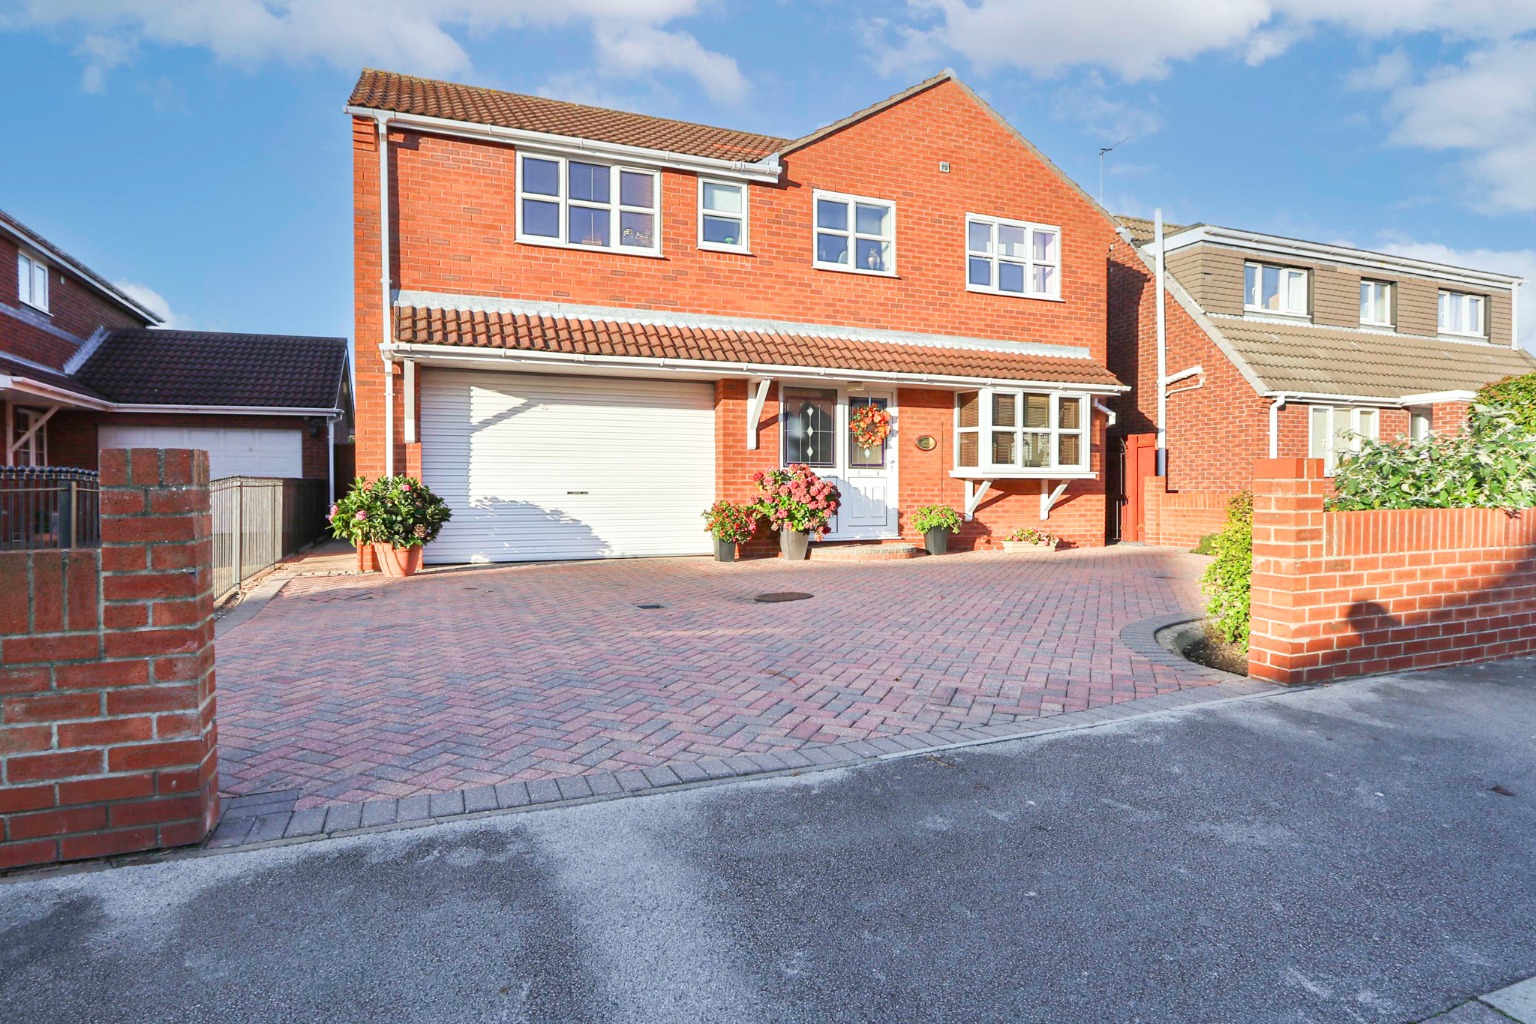 4 bed detached house for sale in Bond Street, Hull - Property Image 1